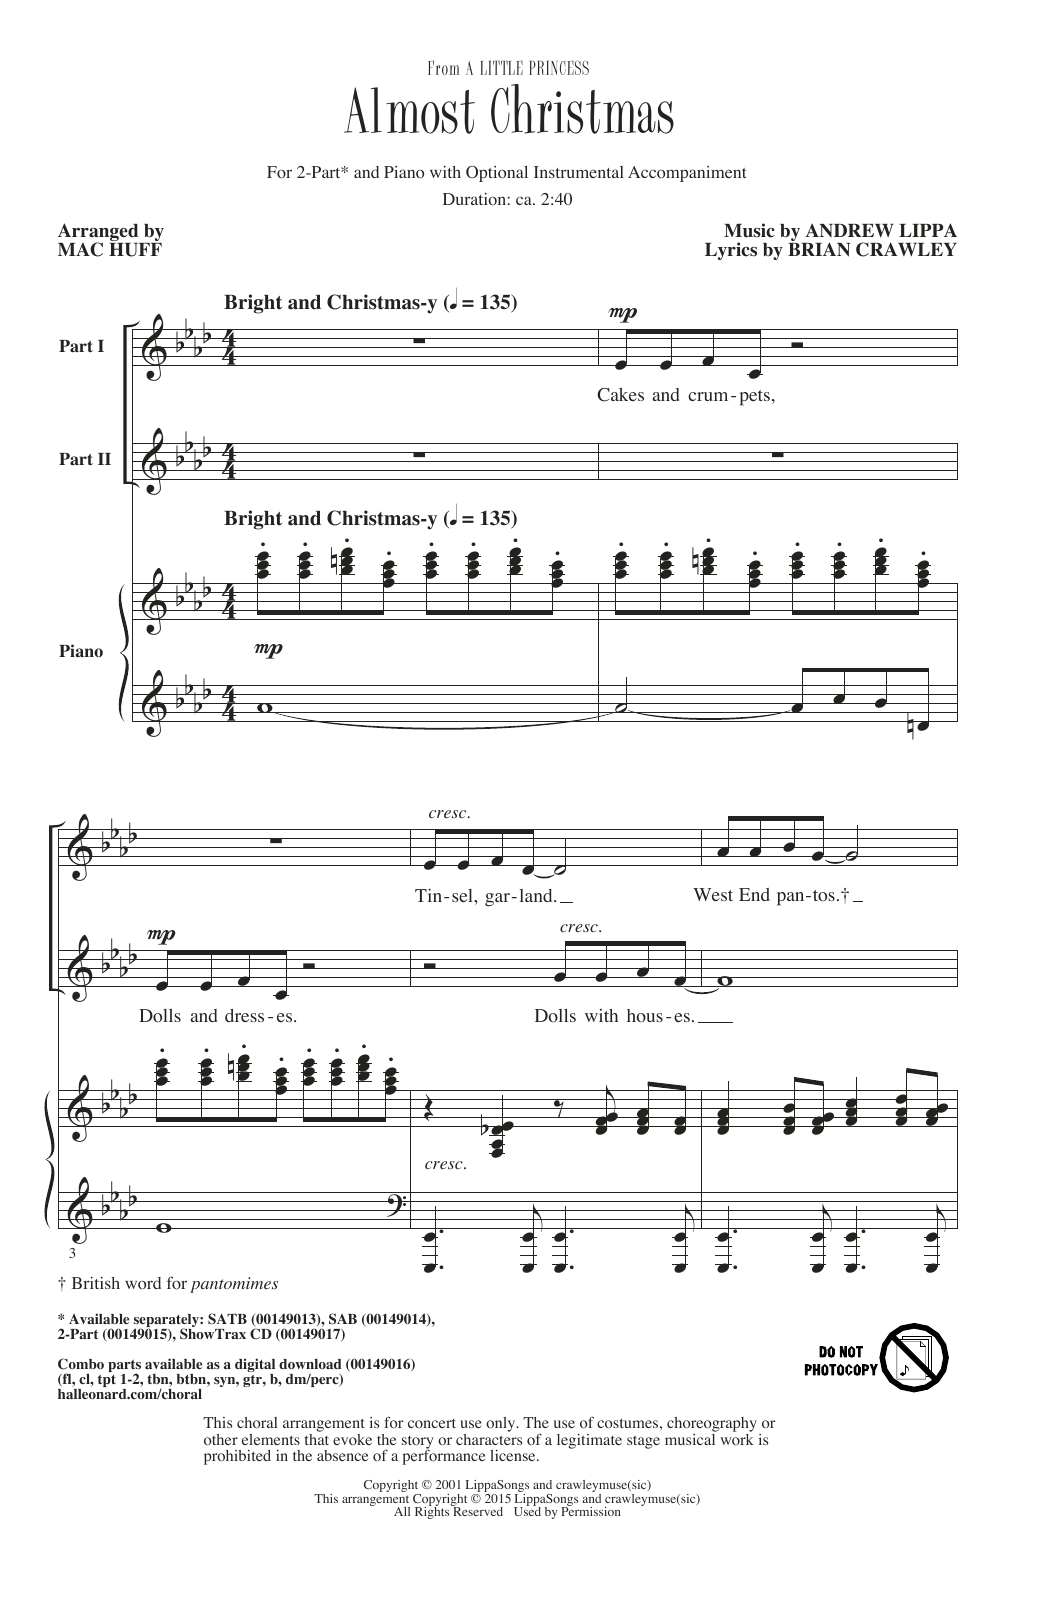 Download Mac Huff Almost Christmas Sheet Music